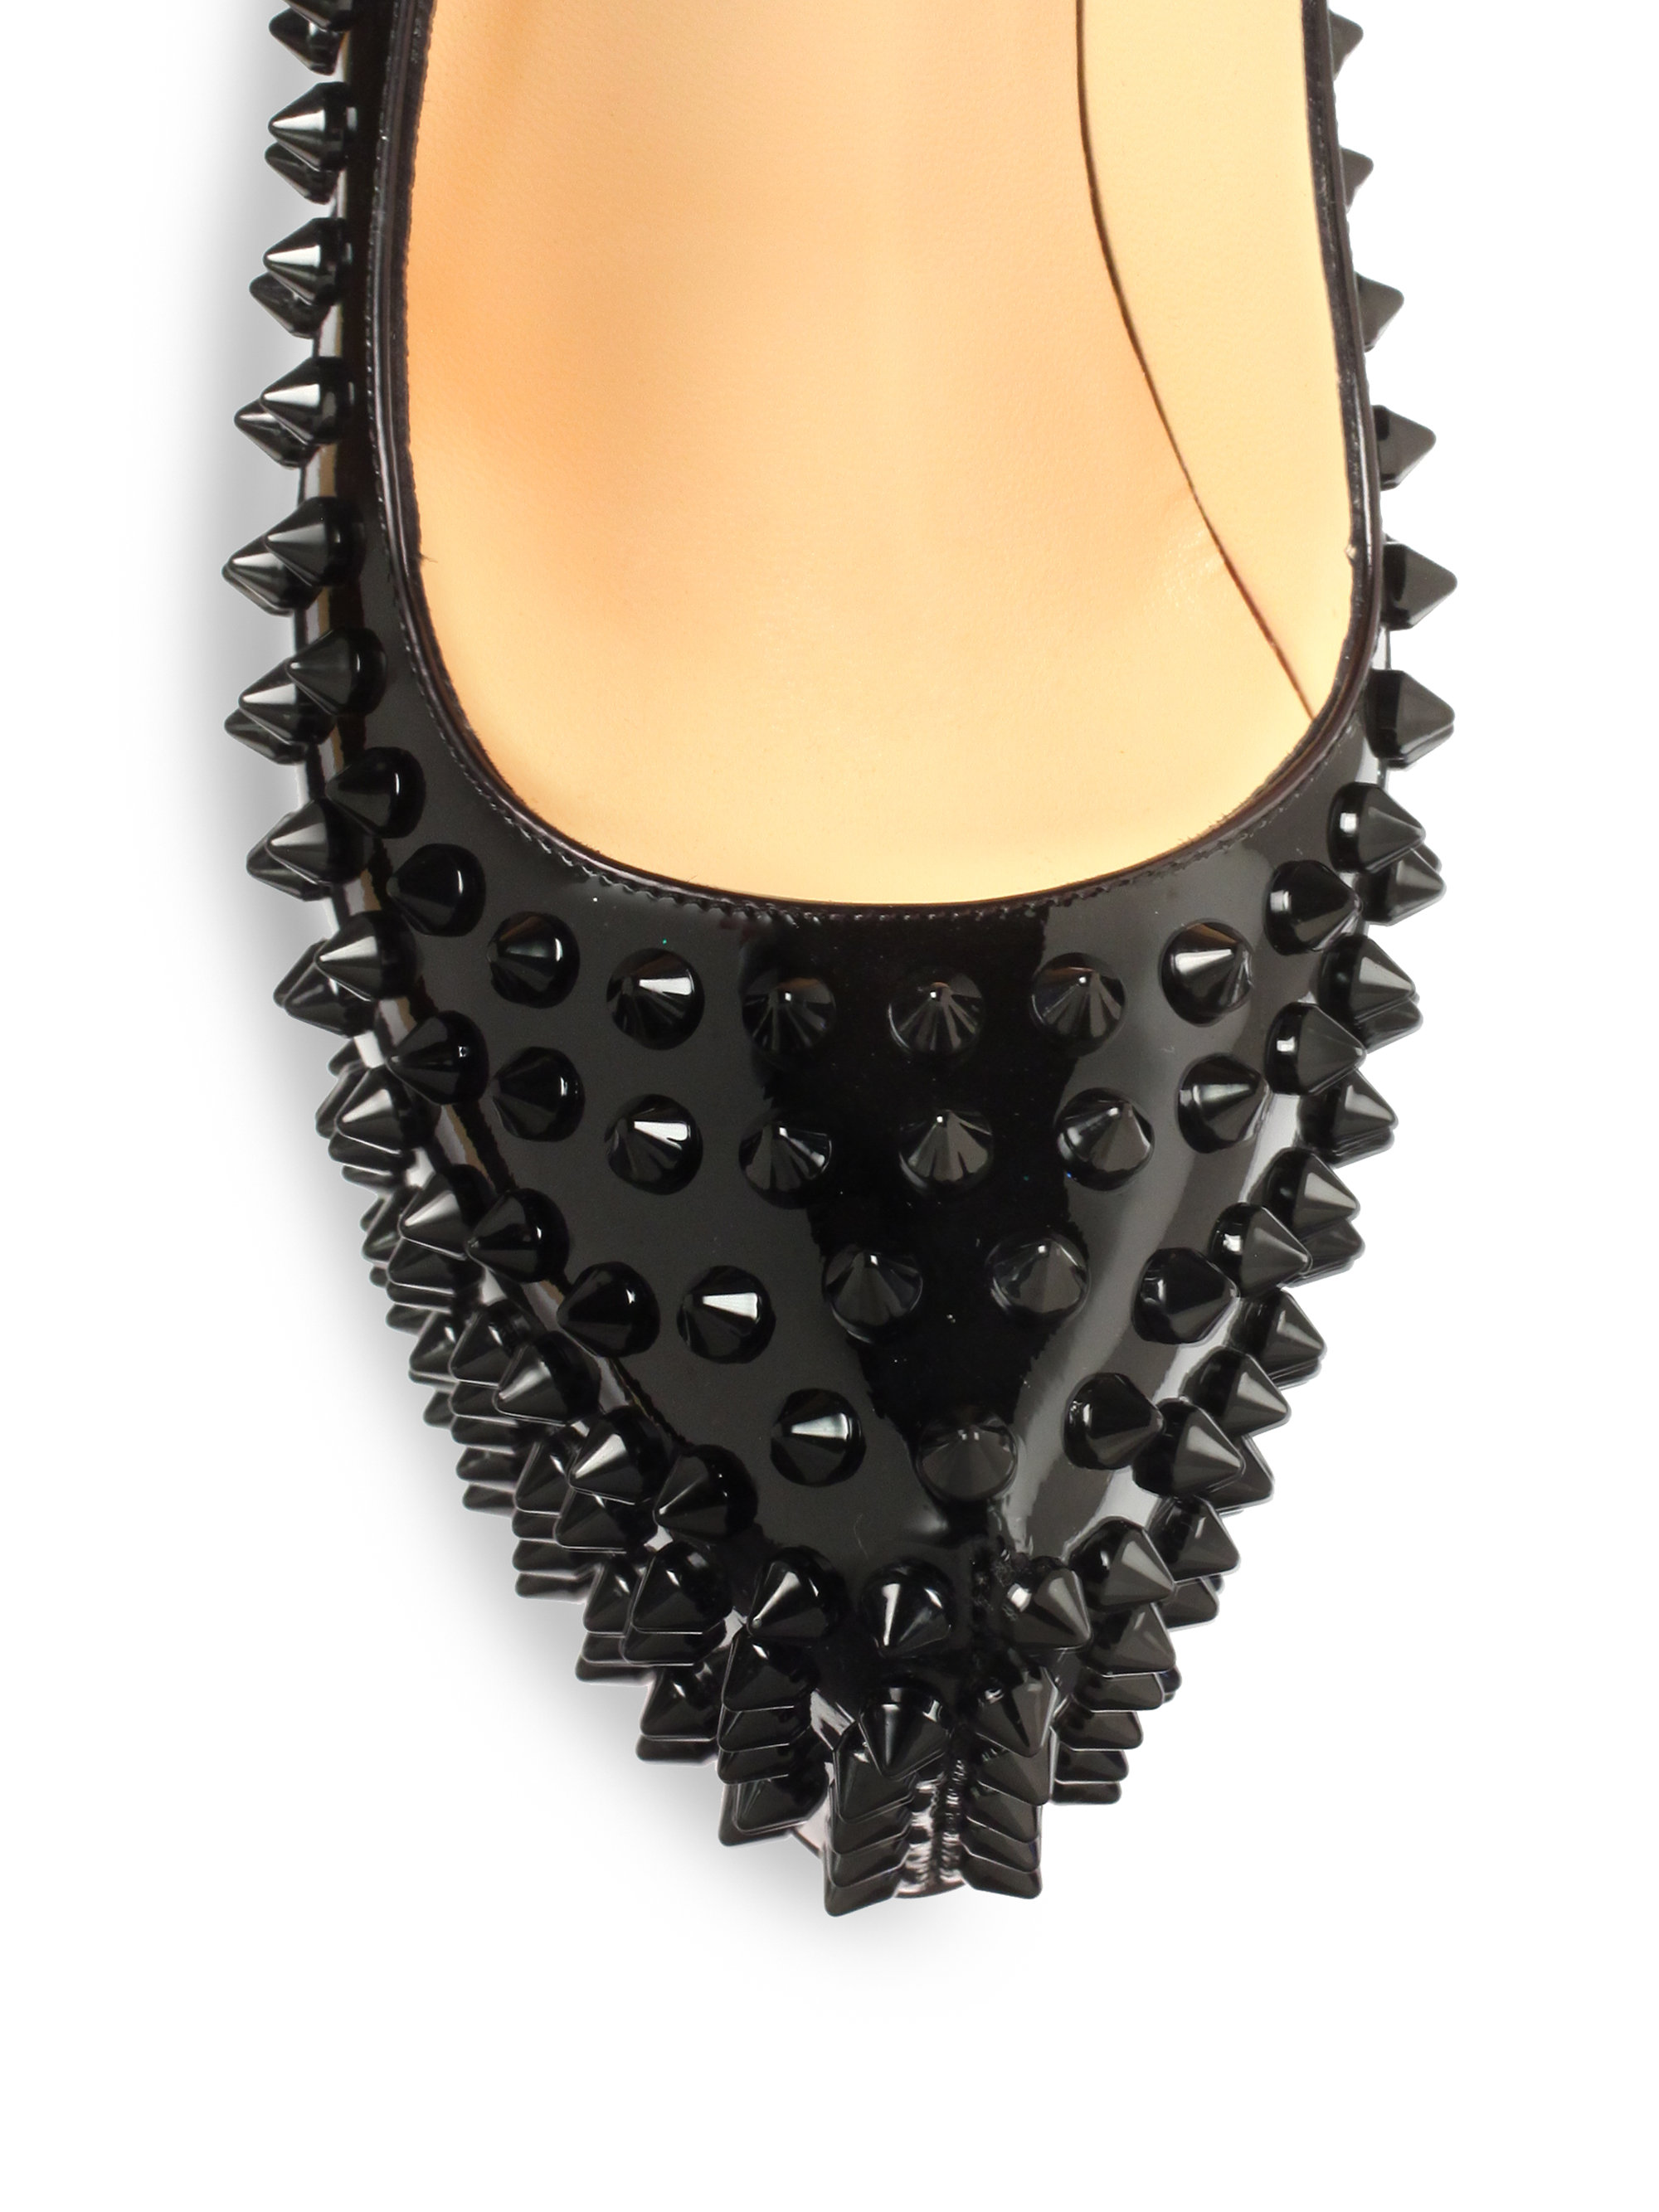 louboutin imitations - Christian louboutin Daffodile Spiked Patent Leather Pumps in Black ...